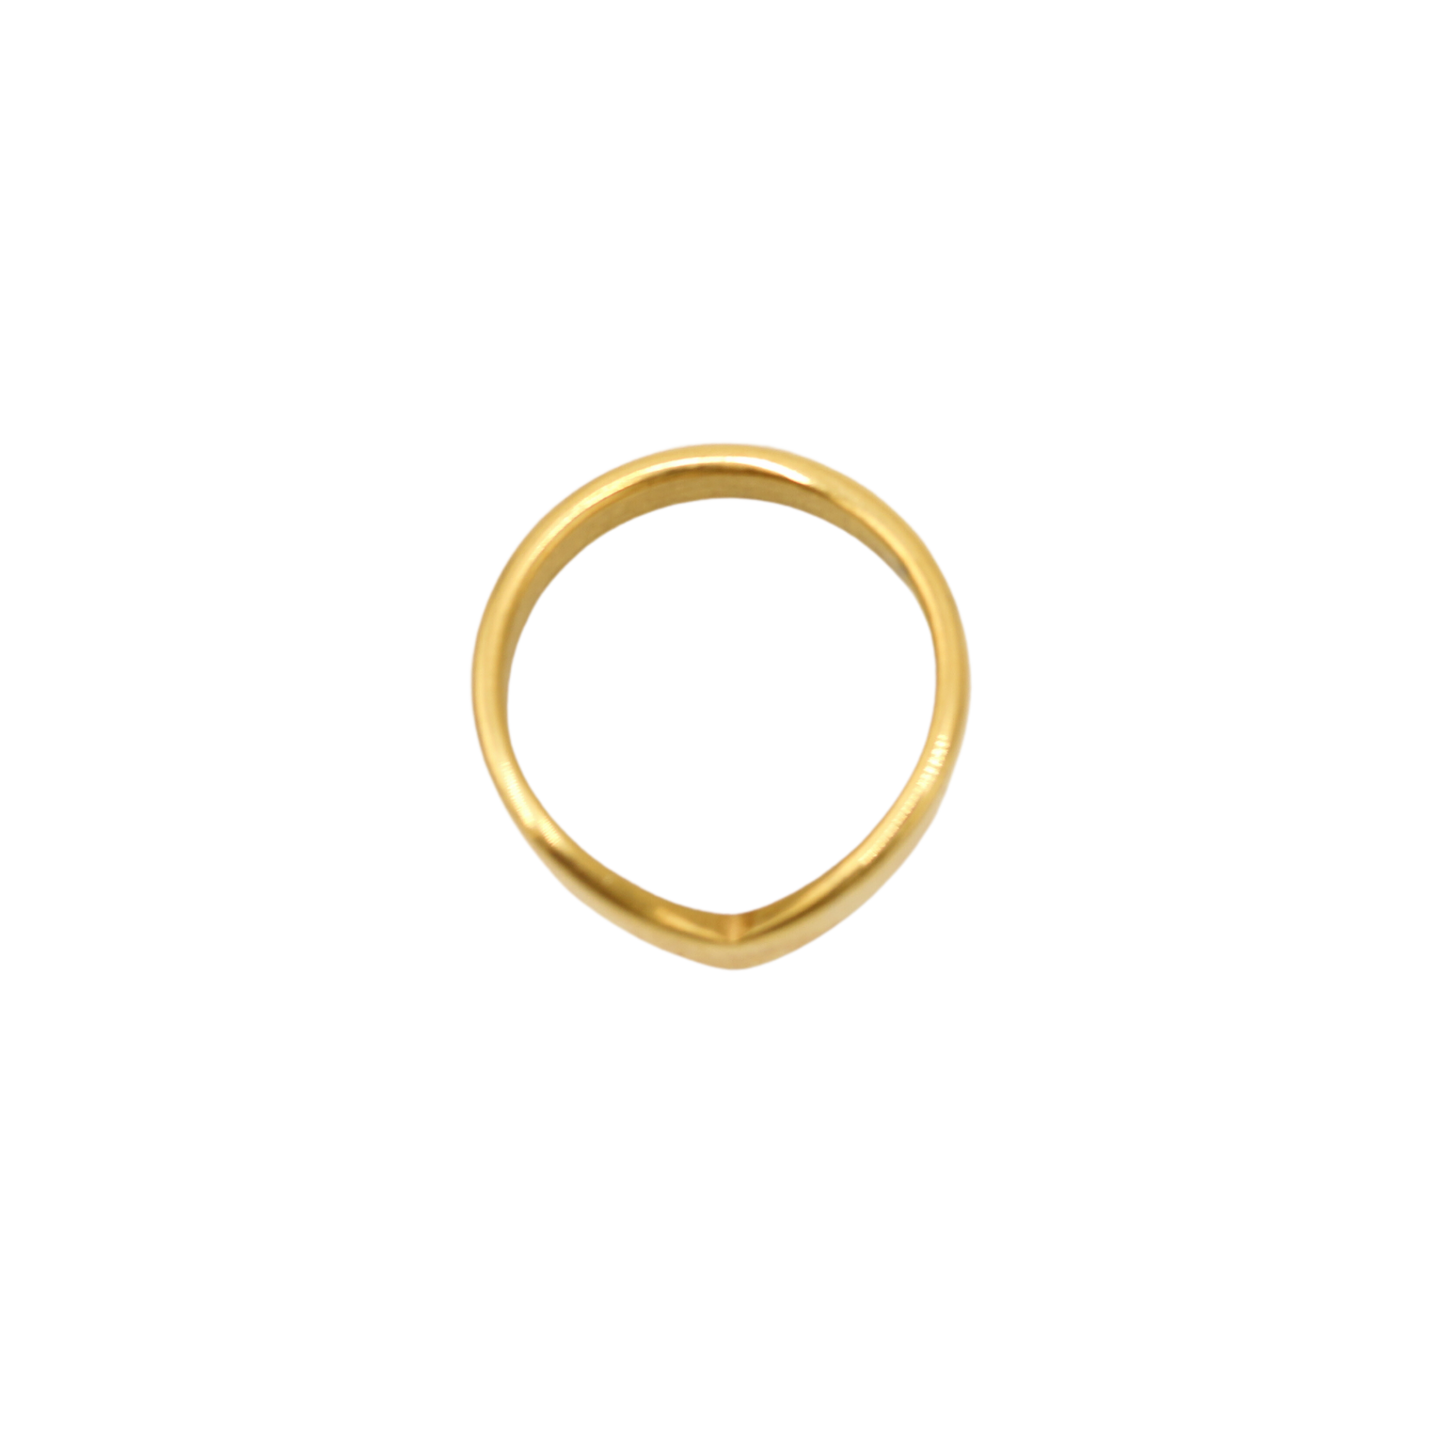 V-Shaped Ring Gold – The Created